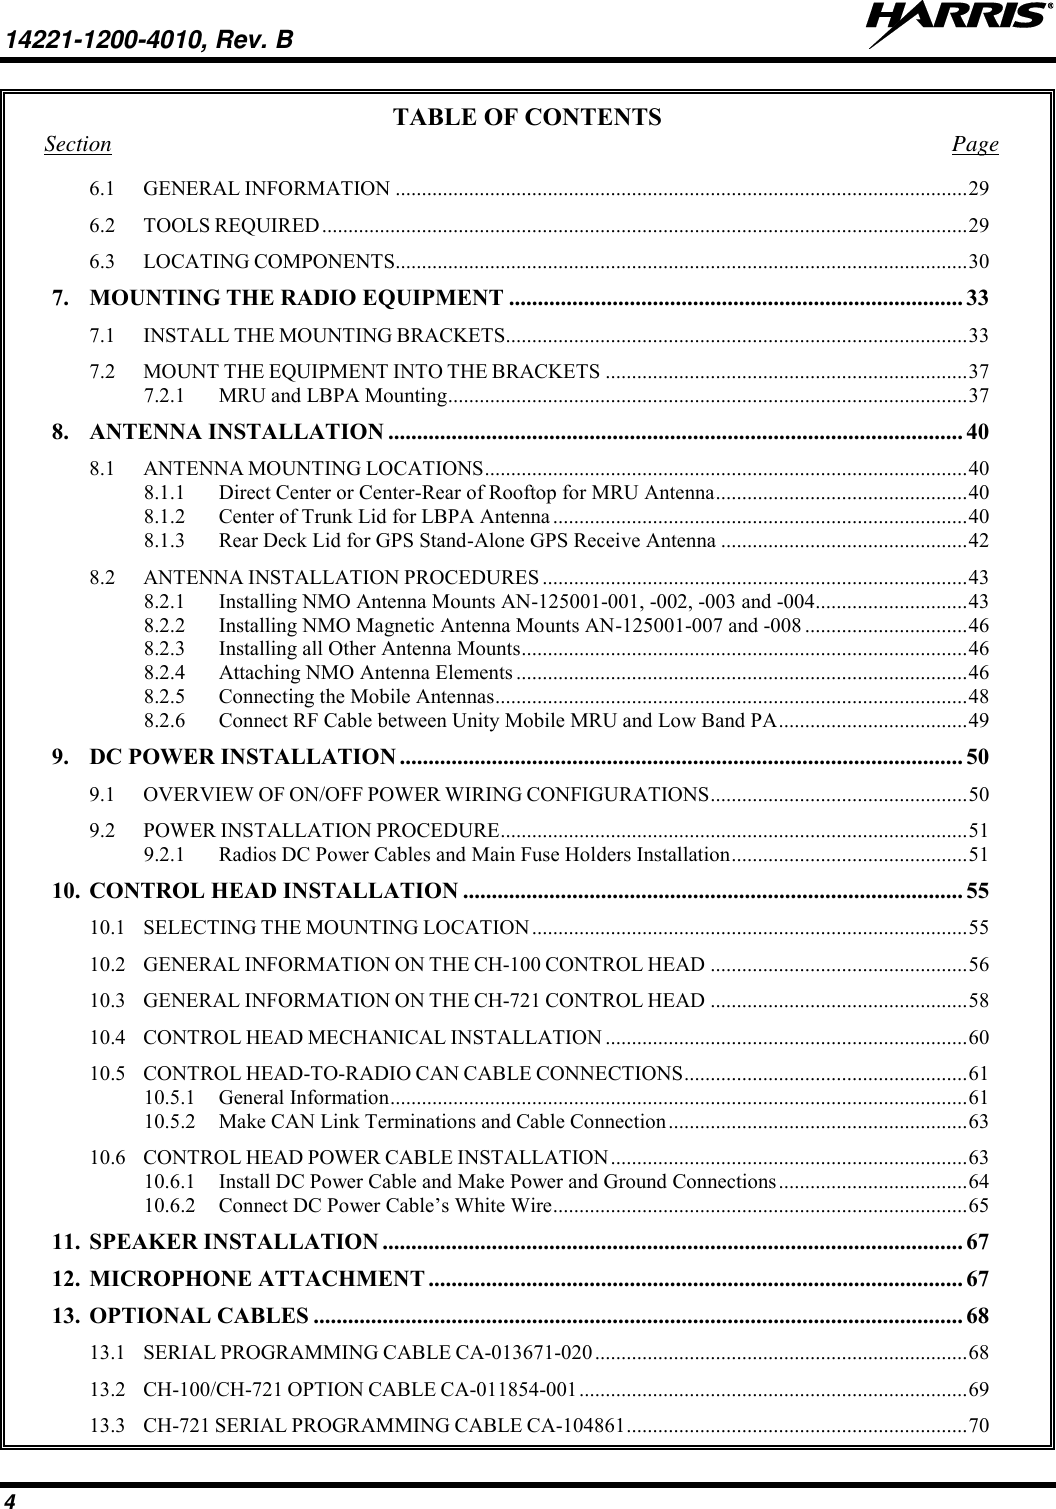 14221-1200-4010, Rev. B   4 TABLE OF CONTENTS Section  Page 6.1 GENERAL INFORMATION ............................................................................................................. 29 6.2 TOOLS REQUIRED ........................................................................................................................... 29 6.3 LOCATING COMPONENTS............................................................................................................. 30 7. MOUNTING THE RADIO EQUIPMENT ............................................................................... 33 7.1 INSTALL THE MOUNTING BRACKETS ........................................................................................ 33 7.2 MOUNT THE EQUIPMENT INTO THE BRACKETS ..................................................................... 37 7.2.1 MRU and LBPA Mounting ................................................................................................... 37 8. ANTENNA INSTALLATION .................................................................................................... 40 8.1 ANTENNA MOUNTING LOCATIONS ............................................................................................ 40 8.1.1 Direct Center or Center-Rear of Rooftop for MRU Antenna ................................................ 40 8.1.2 Center of Trunk Lid for LBPA Antenna ............................................................................... 40 8.1.3 Rear Deck Lid for GPS Stand-Alone GPS Receive Antenna ............................................... 42 8.2 ANTENNA INSTALLATION PROCEDURES ................................................................................. 43 8.2.1 Installing NMO Antenna Mounts AN-125001-001, -002, -003 and -004 ............................. 43 8.2.2 Installing NMO Magnetic Antenna Mounts AN-125001-007 and -008 ............................... 46 8.2.3 Installing all Other Antenna Mounts ..................................................................................... 46 8.2.4 Attaching NMO Antenna Elements ...................................................................................... 46 8.2.5 Connecting the Mobile Antennas .......................................................................................... 48 8.2.6 Connect RF Cable between Unity Mobile MRU and Low Band PA .................................... 49 9. DC POWER INSTALLATION .................................................................................................. 50 9.1 OVERVIEW OF ON/OFF POWER WIRING CONFIGURATIONS ................................................. 50 9.2 POWER INSTALLATION PROCEDURE ......................................................................................... 51 9.2.1 Radios DC Power Cables and Main Fuse Holders Installation ............................................. 51 10. CONTROL HEAD INSTALLATION ....................................................................................... 55 10.1 SELECTING THE MOUNTING LOCATION ................................................................................... 55 10.2 GENERAL INFORMATION ON THE CH-100 CONTROL HEAD ................................................. 56 10.3 GENERAL INFORMATION ON THE CH-721 CONTROL HEAD ................................................. 58 10.4 CONTROL HEAD MECHANICAL INSTALLATION ..................................................................... 60 10.5 CONTROL HEAD-TO-RADIO CAN CABLE CONNECTIONS ...................................................... 61 10.5.1 General Information .............................................................................................................. 61 10.5.2 Make CAN Link Terminations and Cable Connection ......................................................... 63 10.6 CONTROL HEAD POWER CABLE INSTALLATION .................................................................... 63 10.6.1 Install DC Power Cable and Make Power and Ground Connections .................................... 64 10.6.2 Connect DC Power Cable’s White Wire ............................................................................... 65 11. SPEAKER INSTALLATION ..................................................................................................... 67 12. MICROPHONE ATTACHMENT ............................................................................................. 67 13. OPTIONAL CABLES ................................................................................................................. 68 13.1 SERIAL PROGRAMMING CABLE CA-013671-020 ....................................................................... 68 13.2 CH-100/CH-721 OPTION CABLE CA-011854-001 .......................................................................... 69 13.3 CH-721 SERIAL PROGRAMMING CABLE CA-104861 ................................................................. 70 